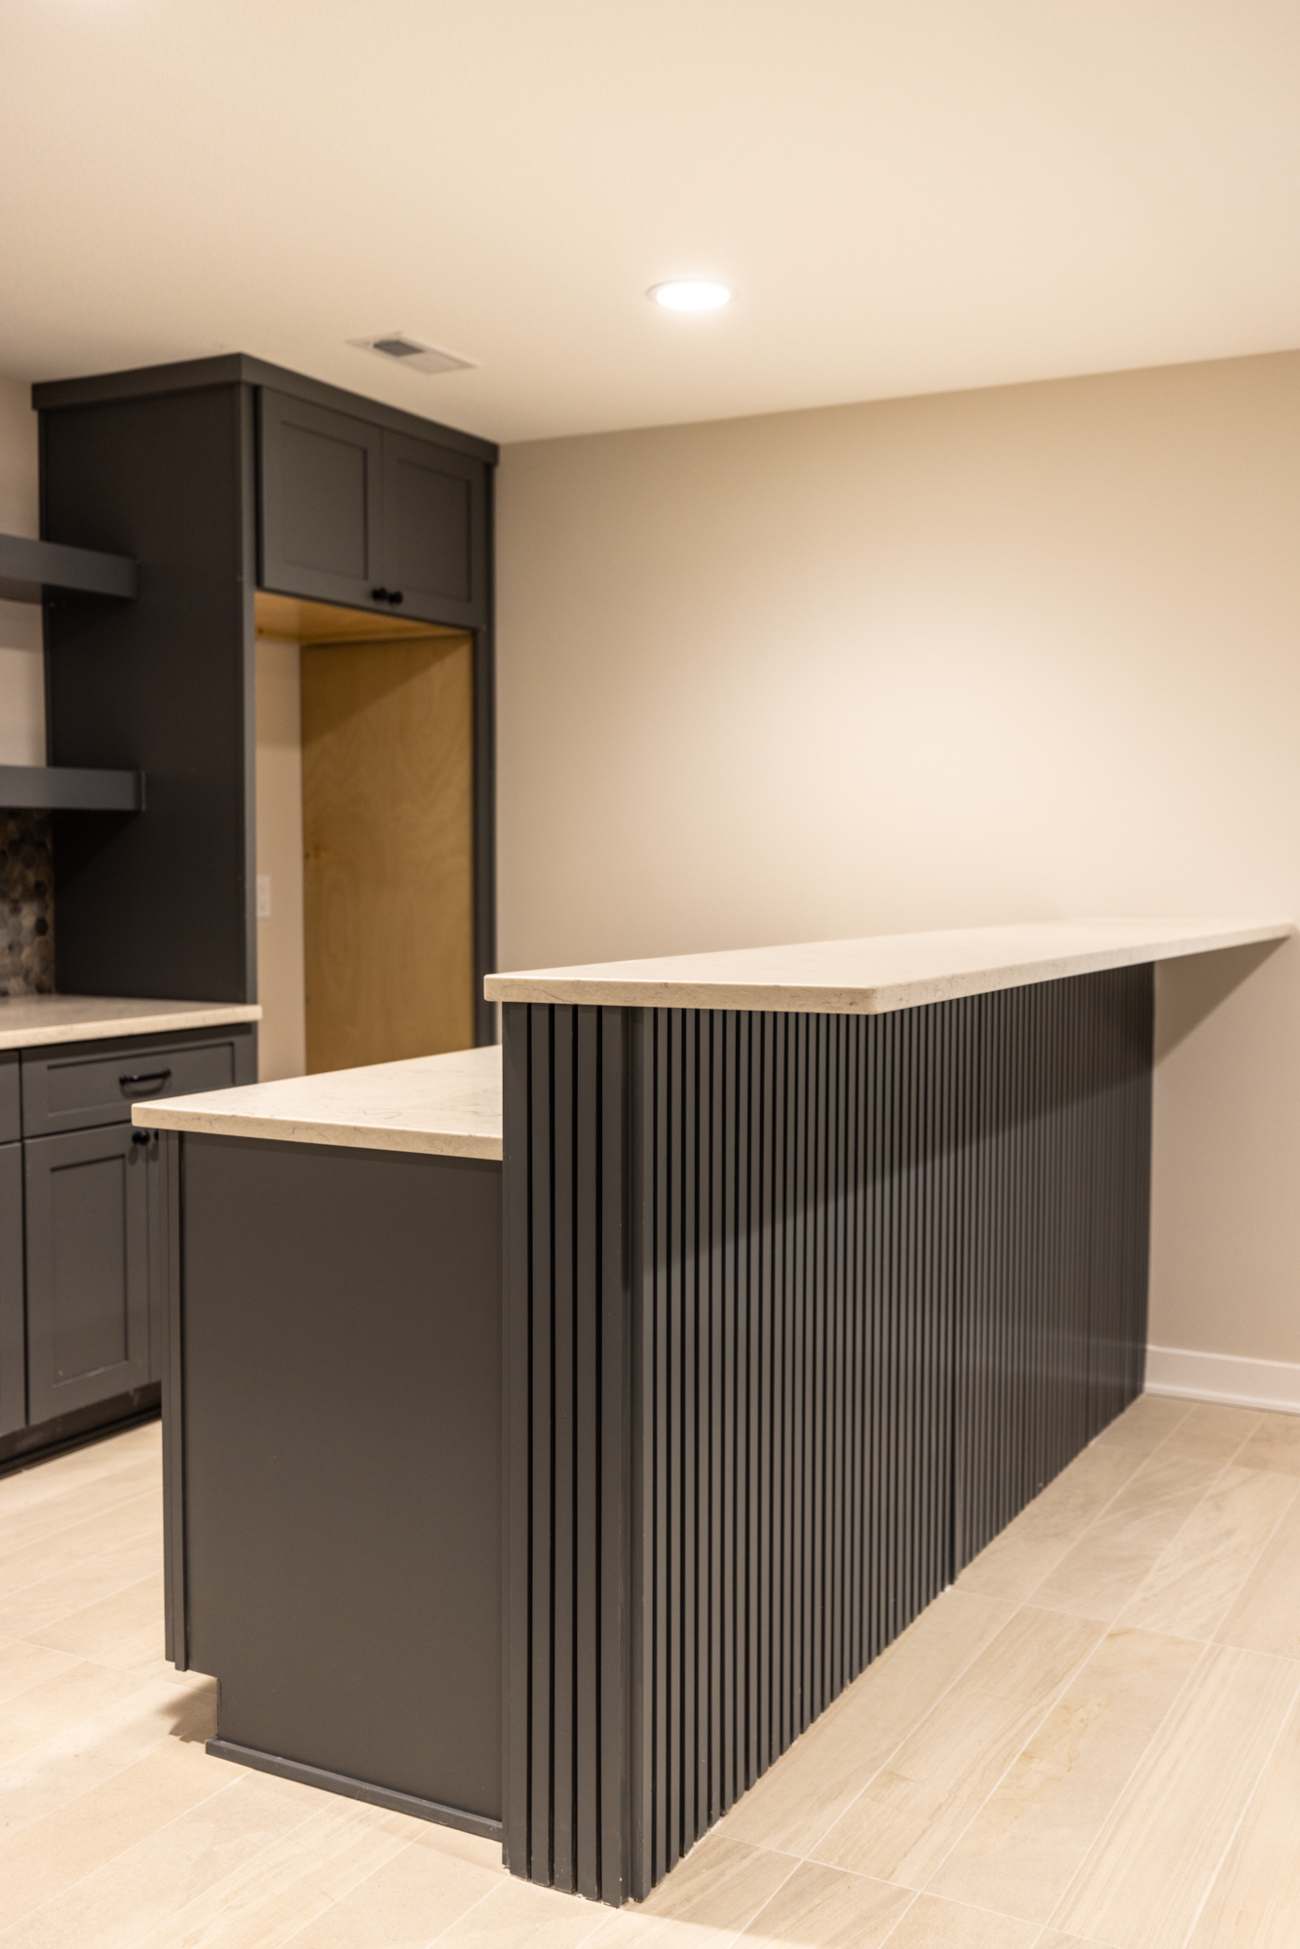 Kitchen Remodeling in Des Moines, IA